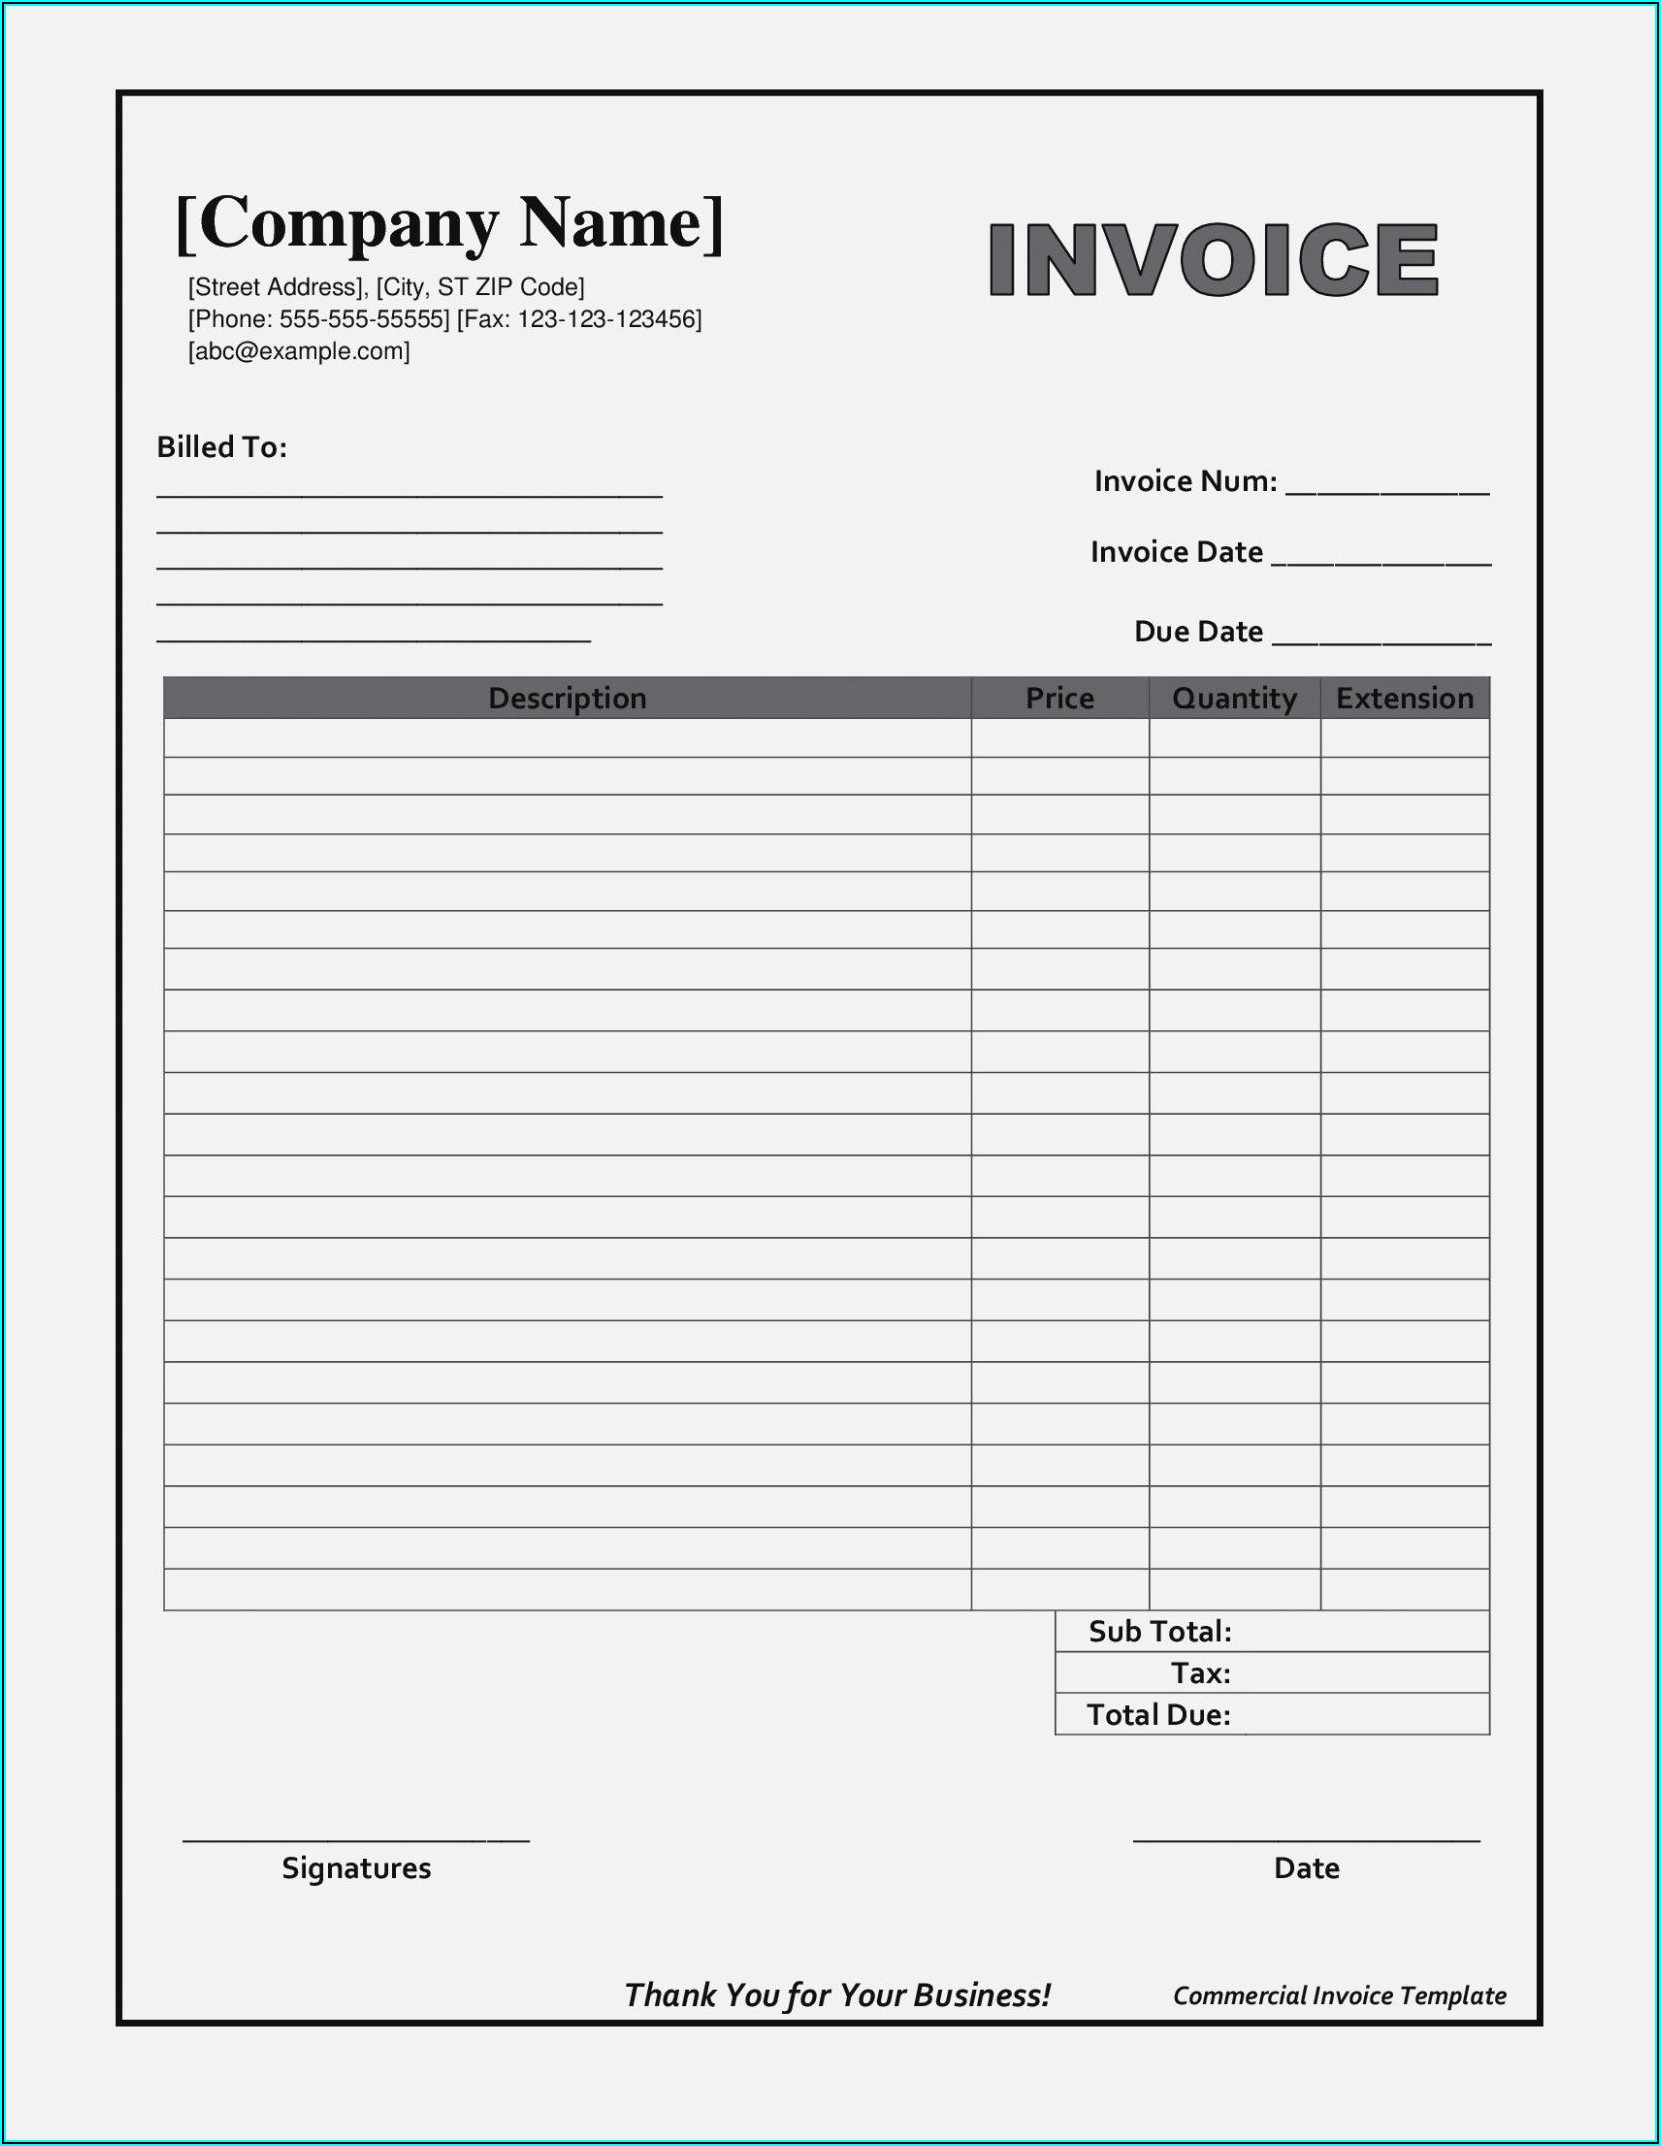 Printable Invoice Forms